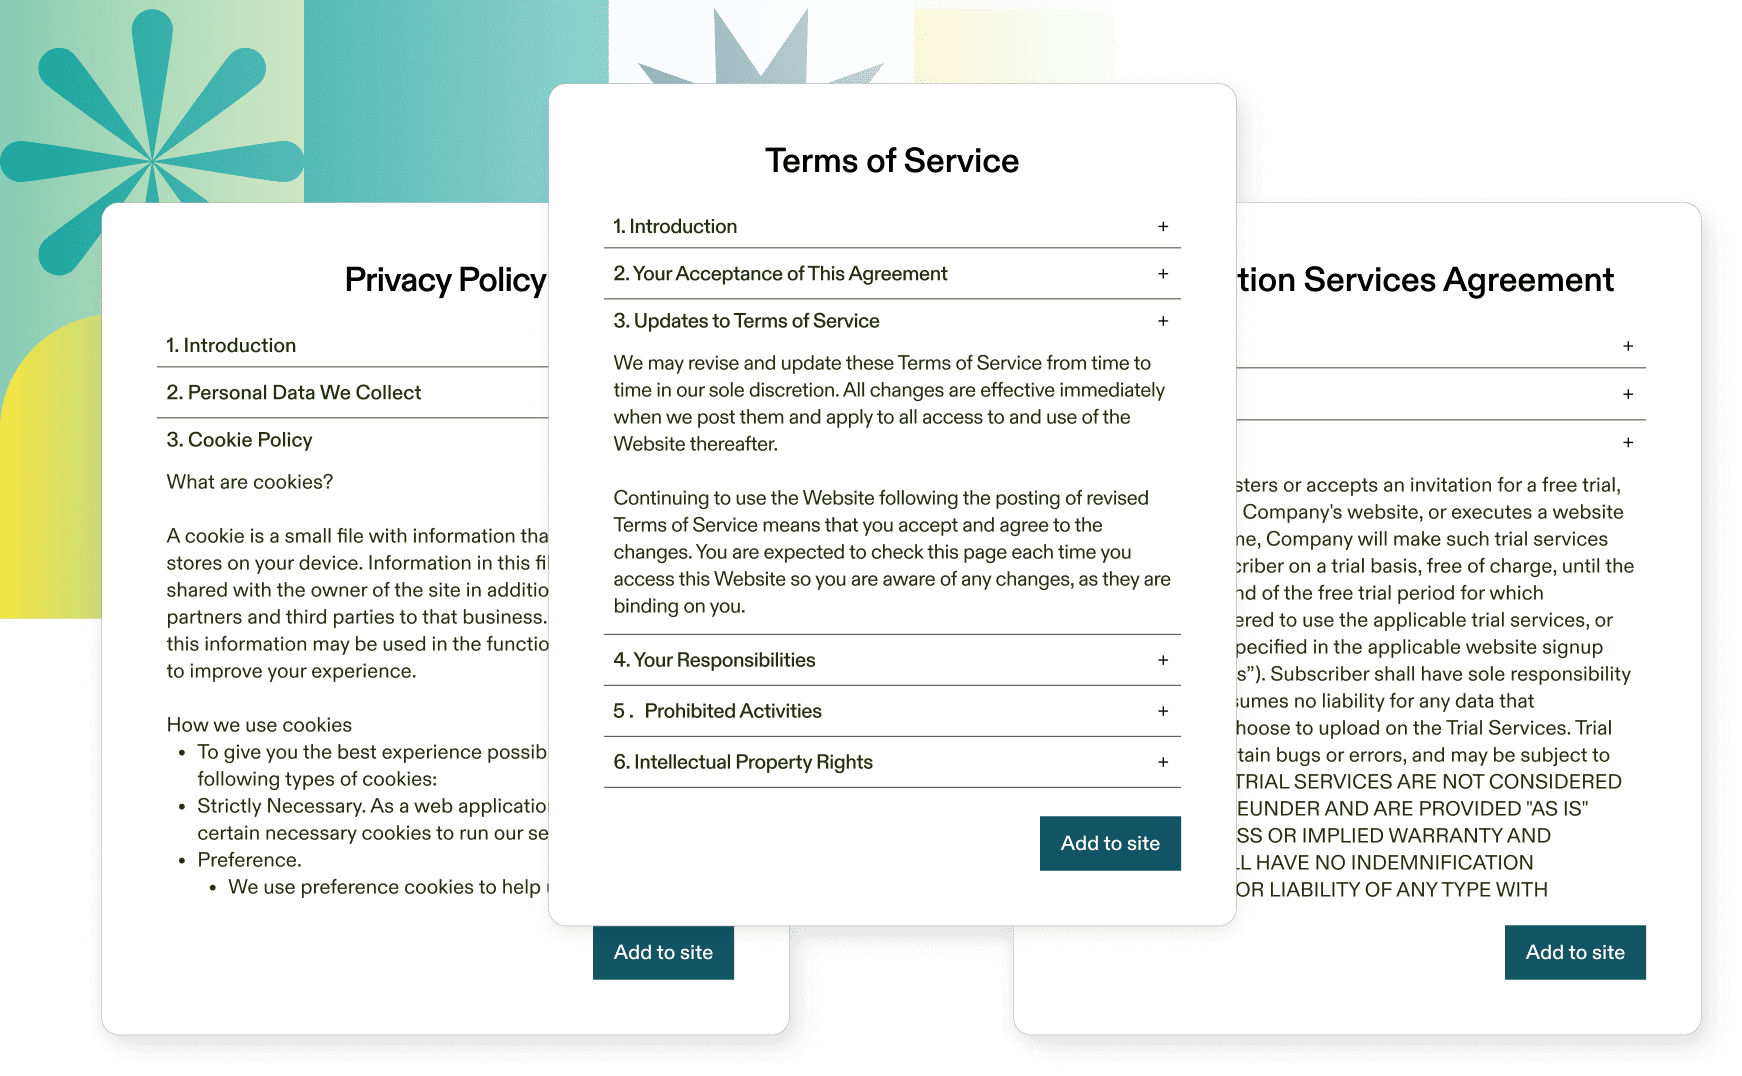 a privacy policy, terms of service and subscription services agreement side by side.